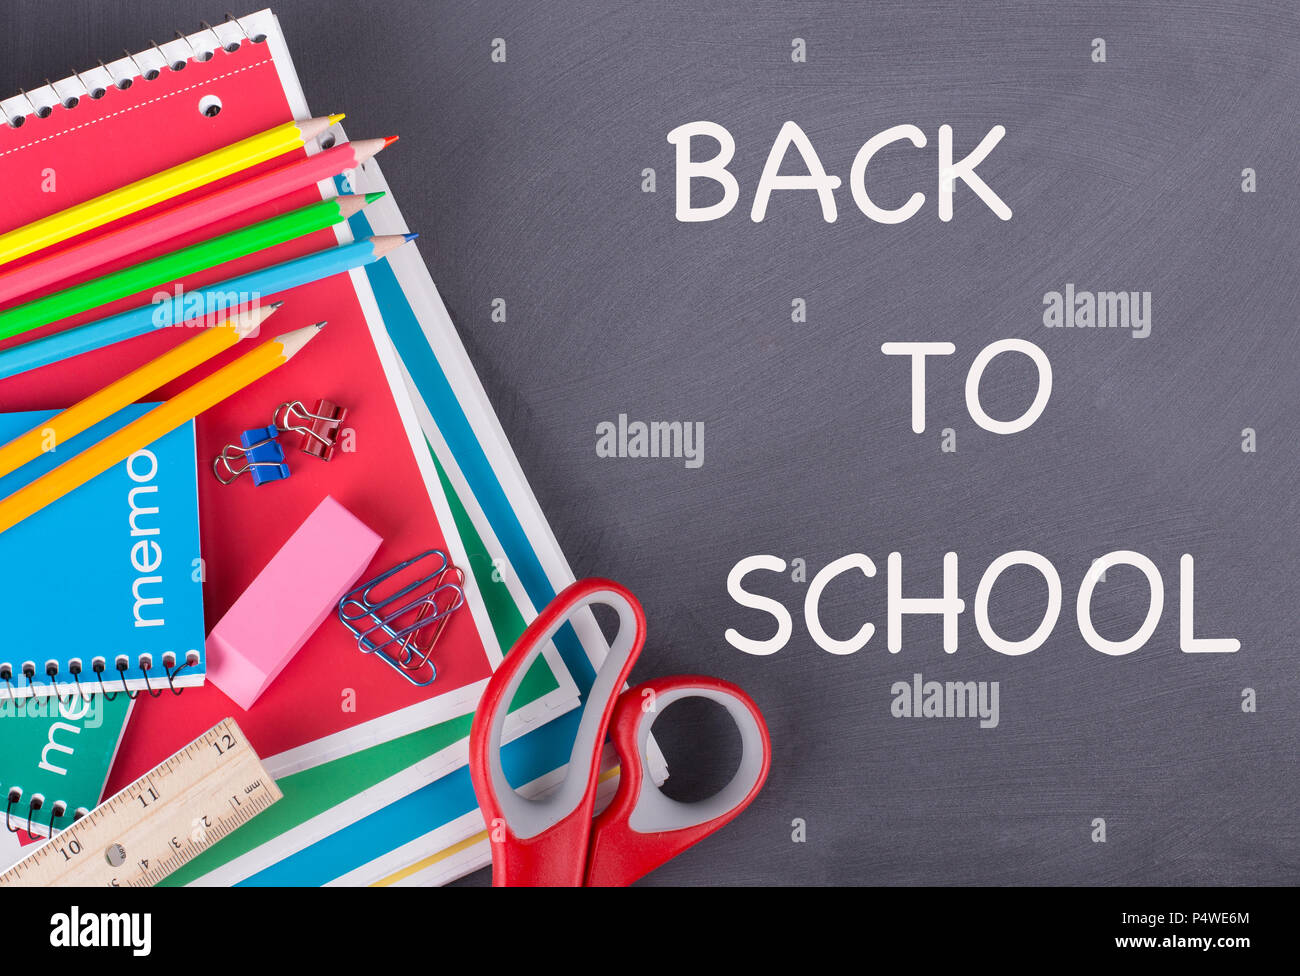 School supplies on a chalkboard background with BACK TO SCHOOL text Stock Photo